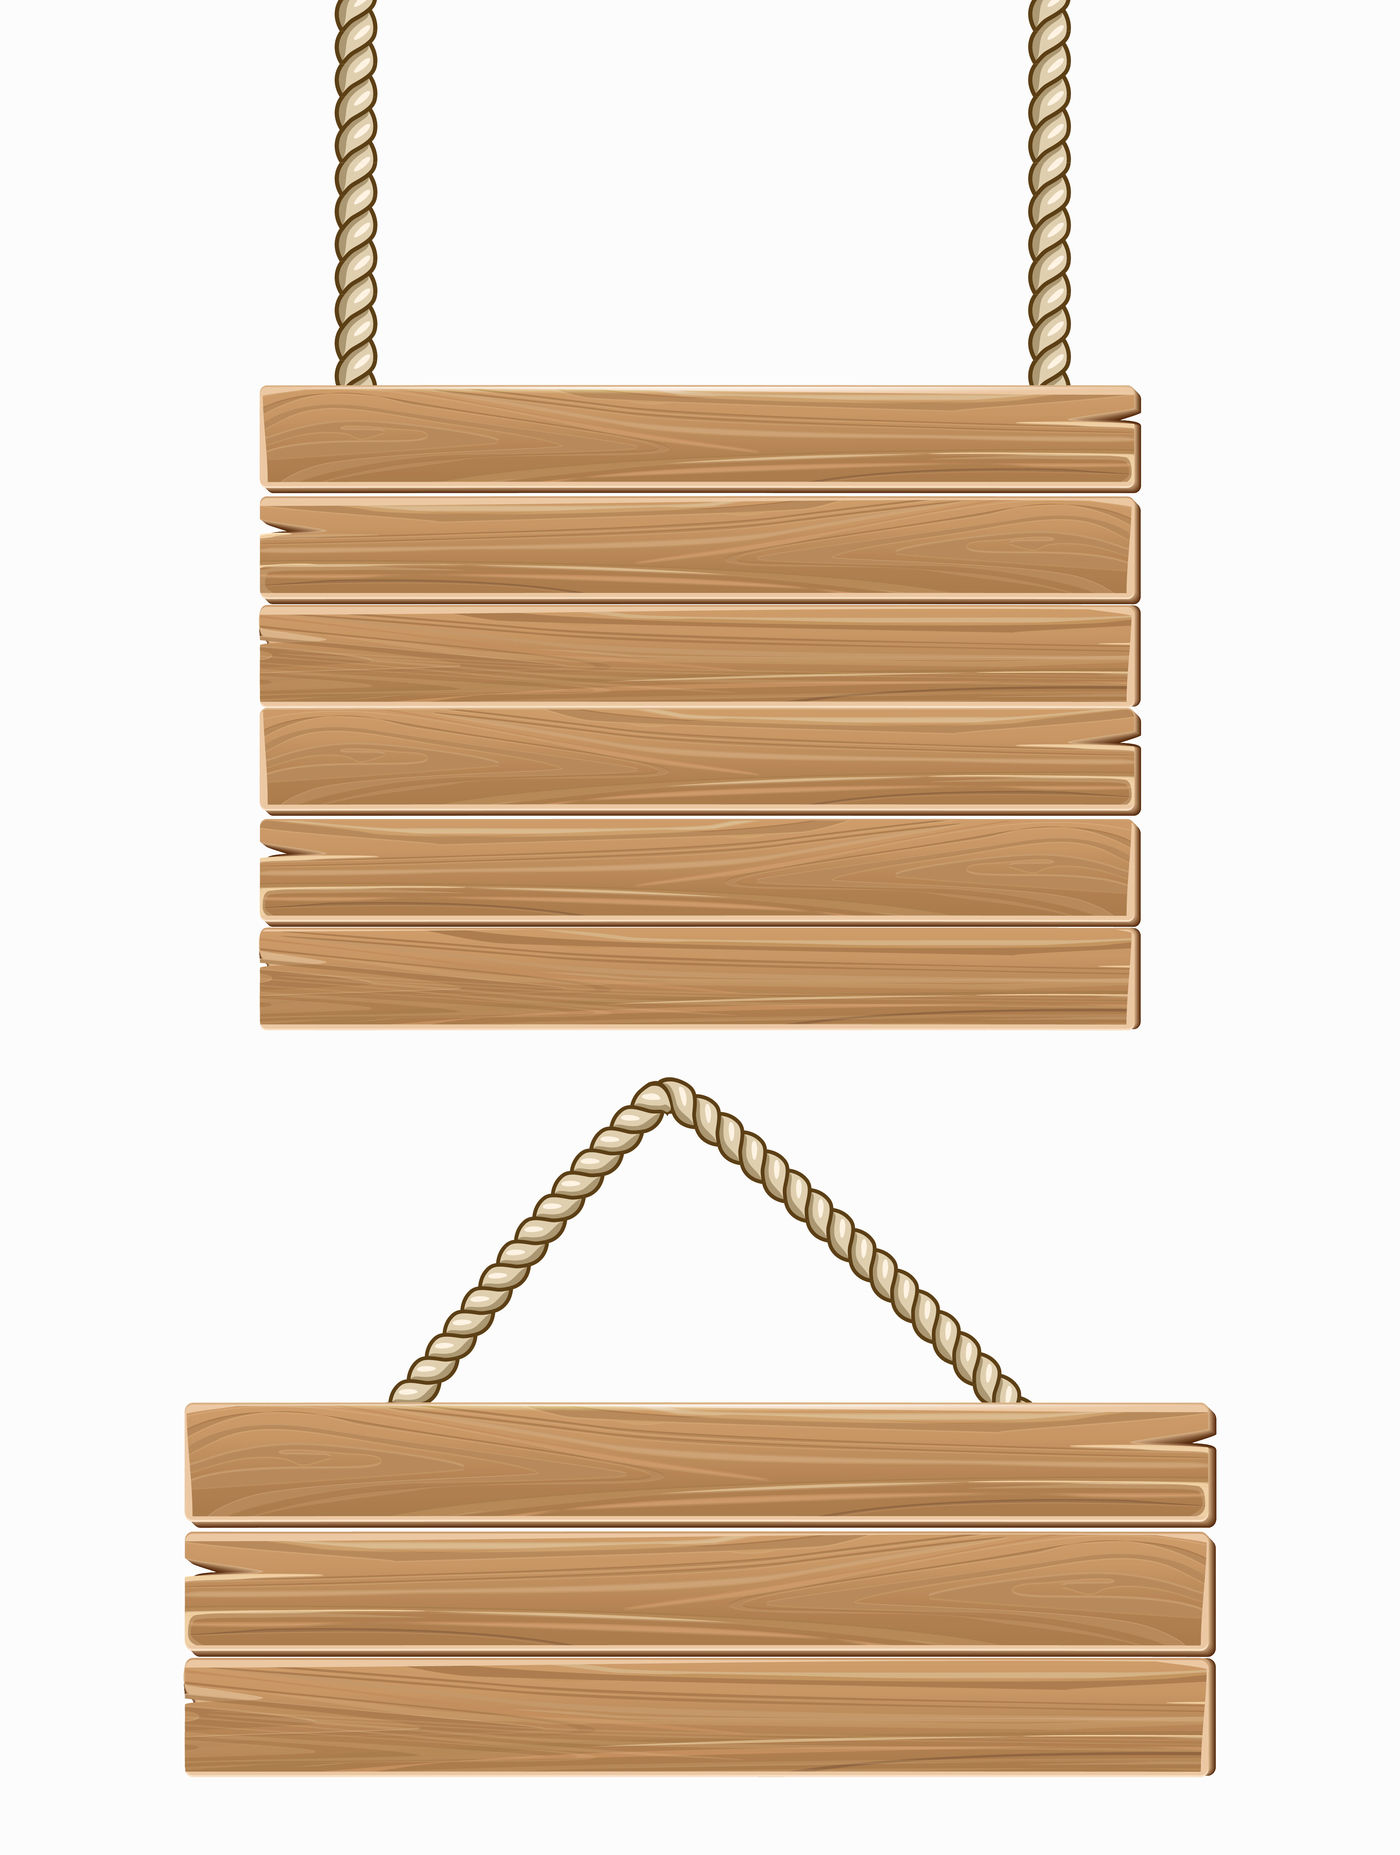 https://media1.thehungryjpeg.com/thumbs2/ori_3505719_331f57088b5a75bfe8d76d029688ec3e36a9f374_hanging-vector-wooden-blank-sign-boards-isolated-over-white.jpg